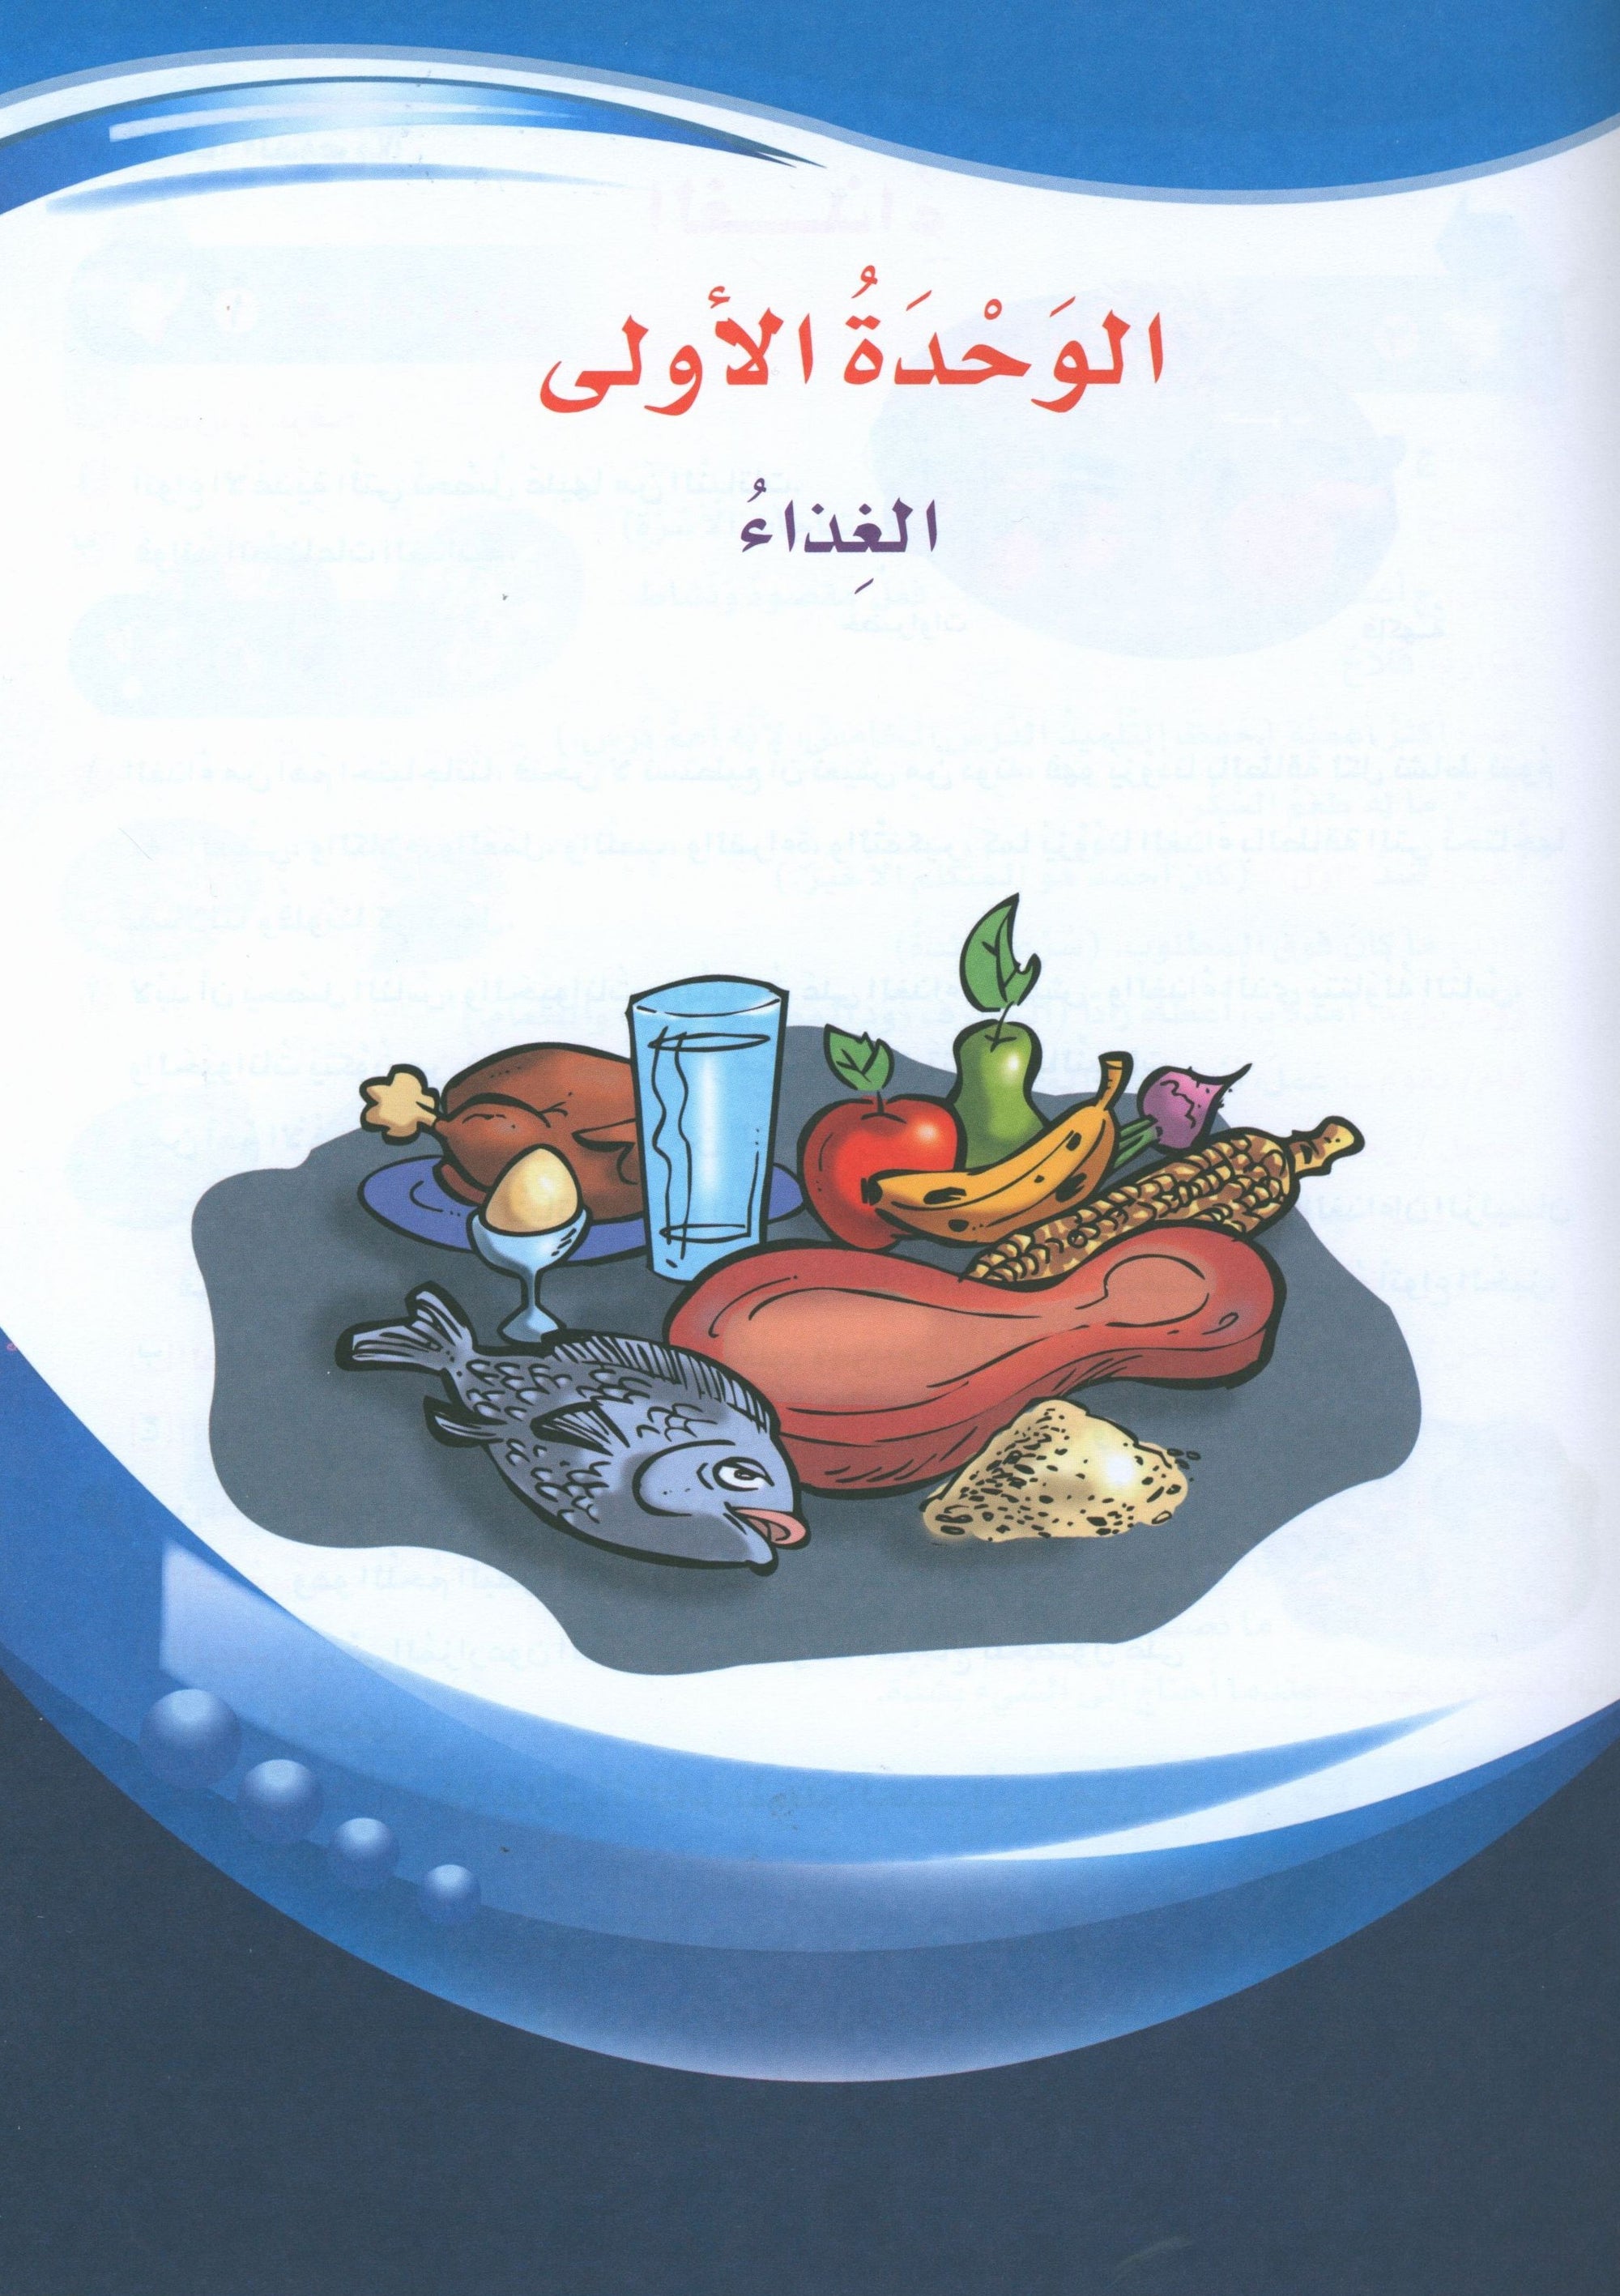 ICO Learn Arabic Textbook: Level 4, Part 1 (With Online Access Code) تعلم  العربية - Furqaan Bookstore